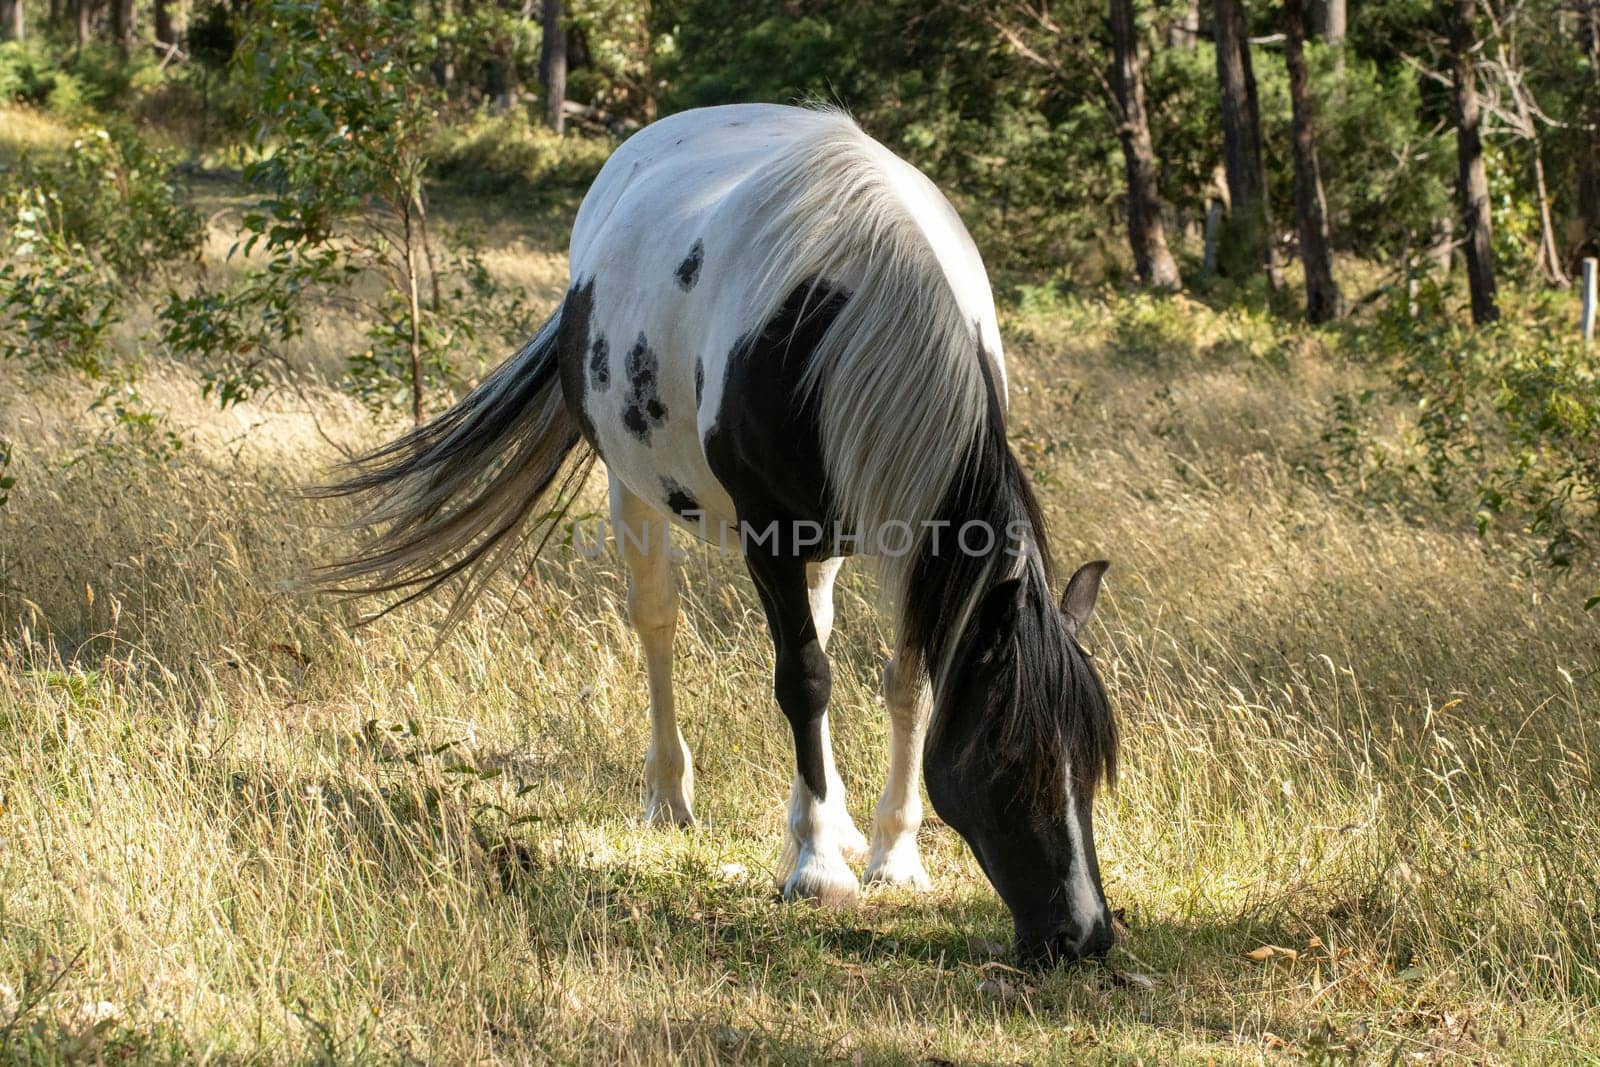 A piebald black and white horse peacefully grazing in a field by StefanMal